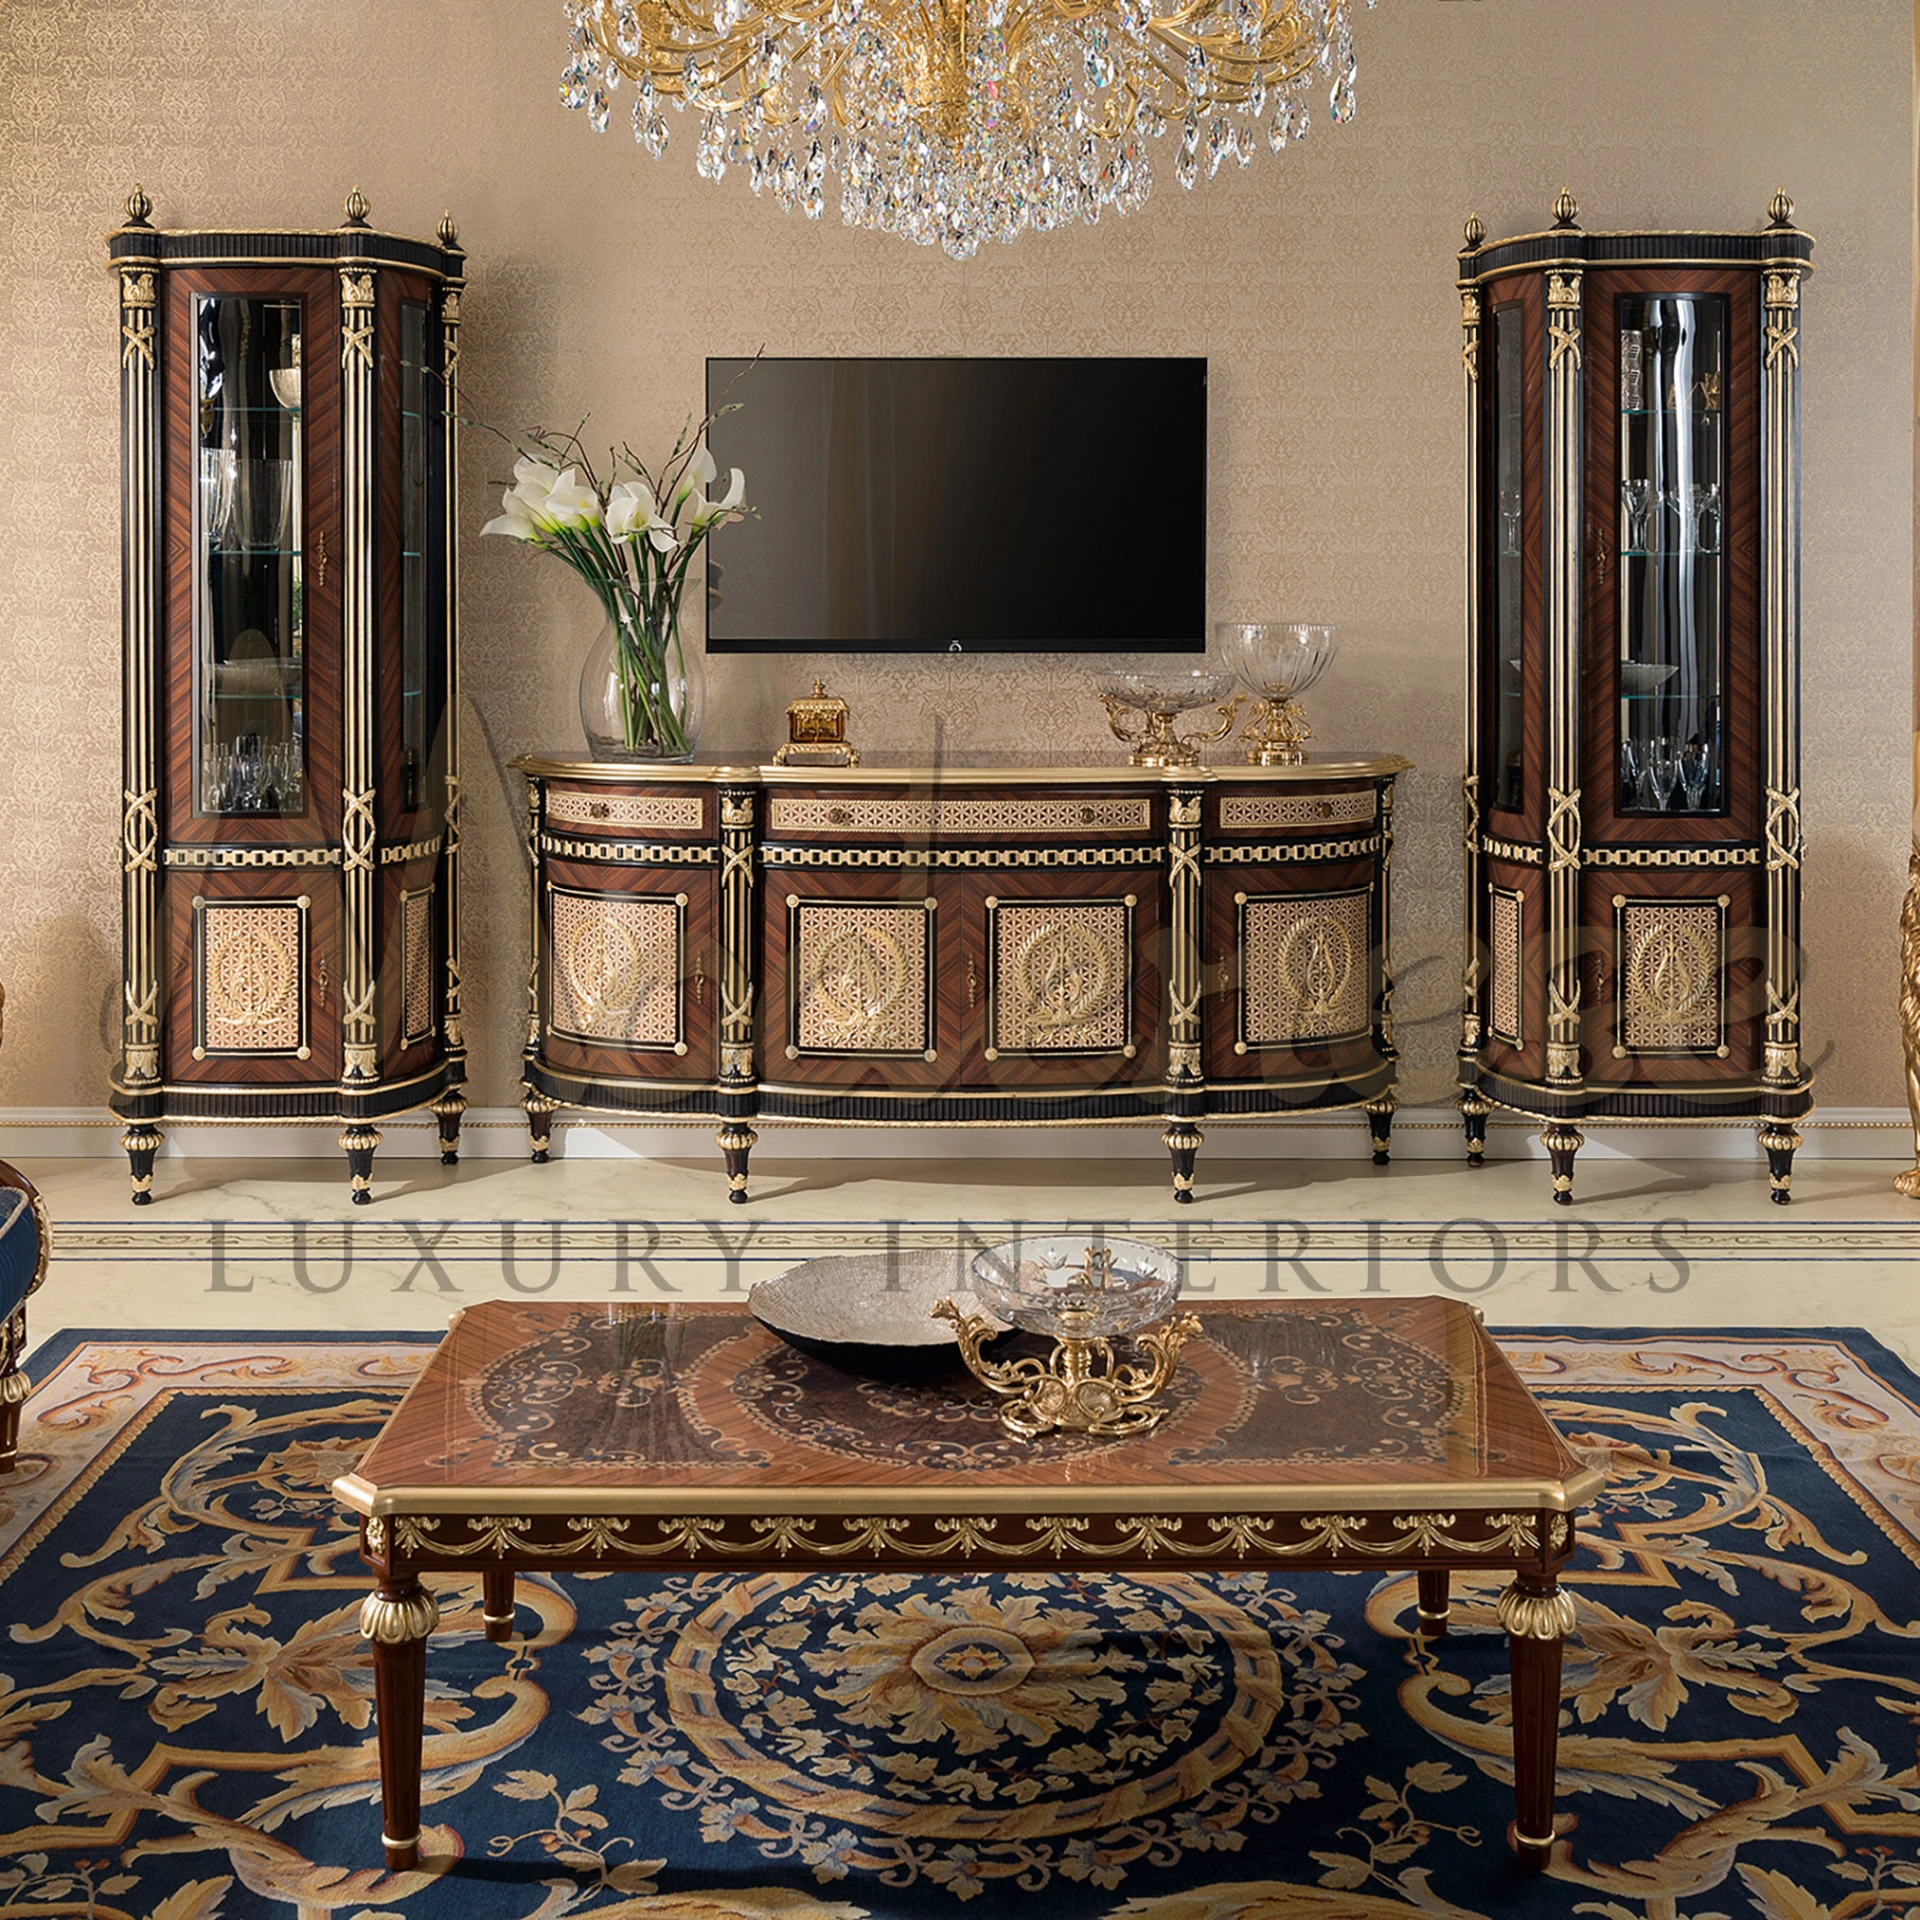 Experience luxury like never before with Modenese Luxury Interior's opulent creation. Adorned with empire-style legs, golden carvings, dark columns, and elegant glass accents.